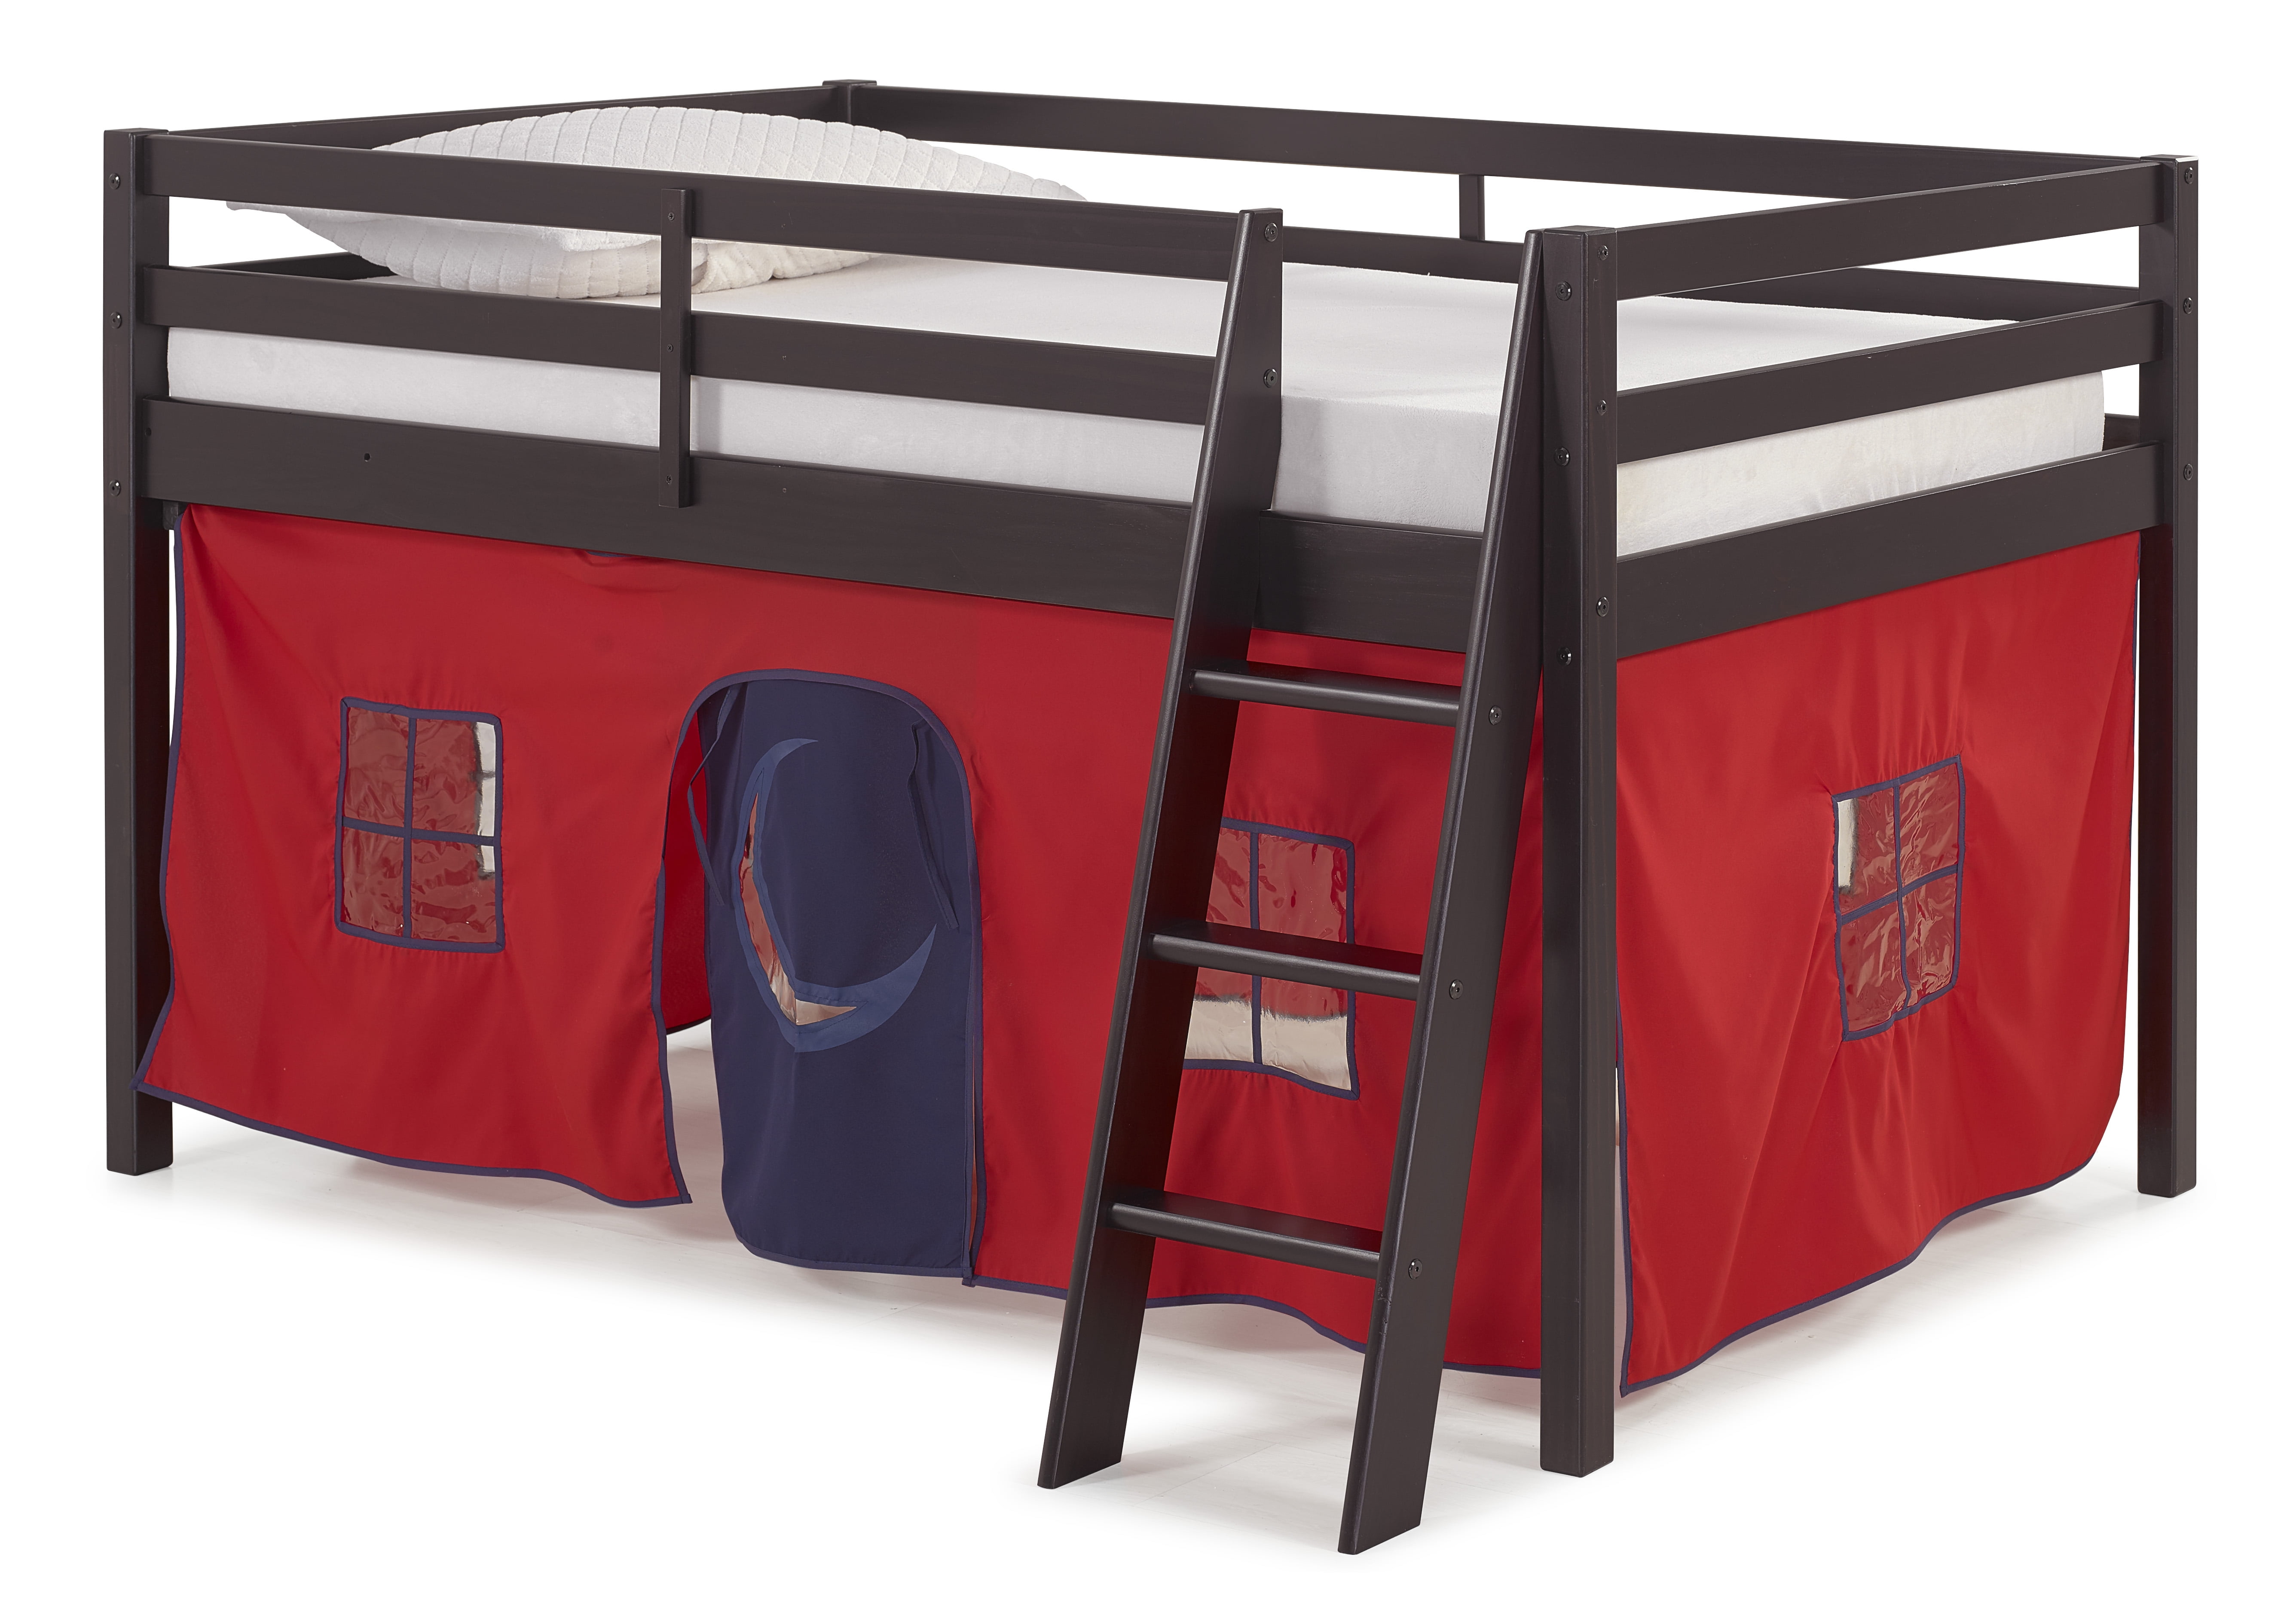 Roxy Junior Loft Bed With Red And Blue, Castle Bunk Bed Tent